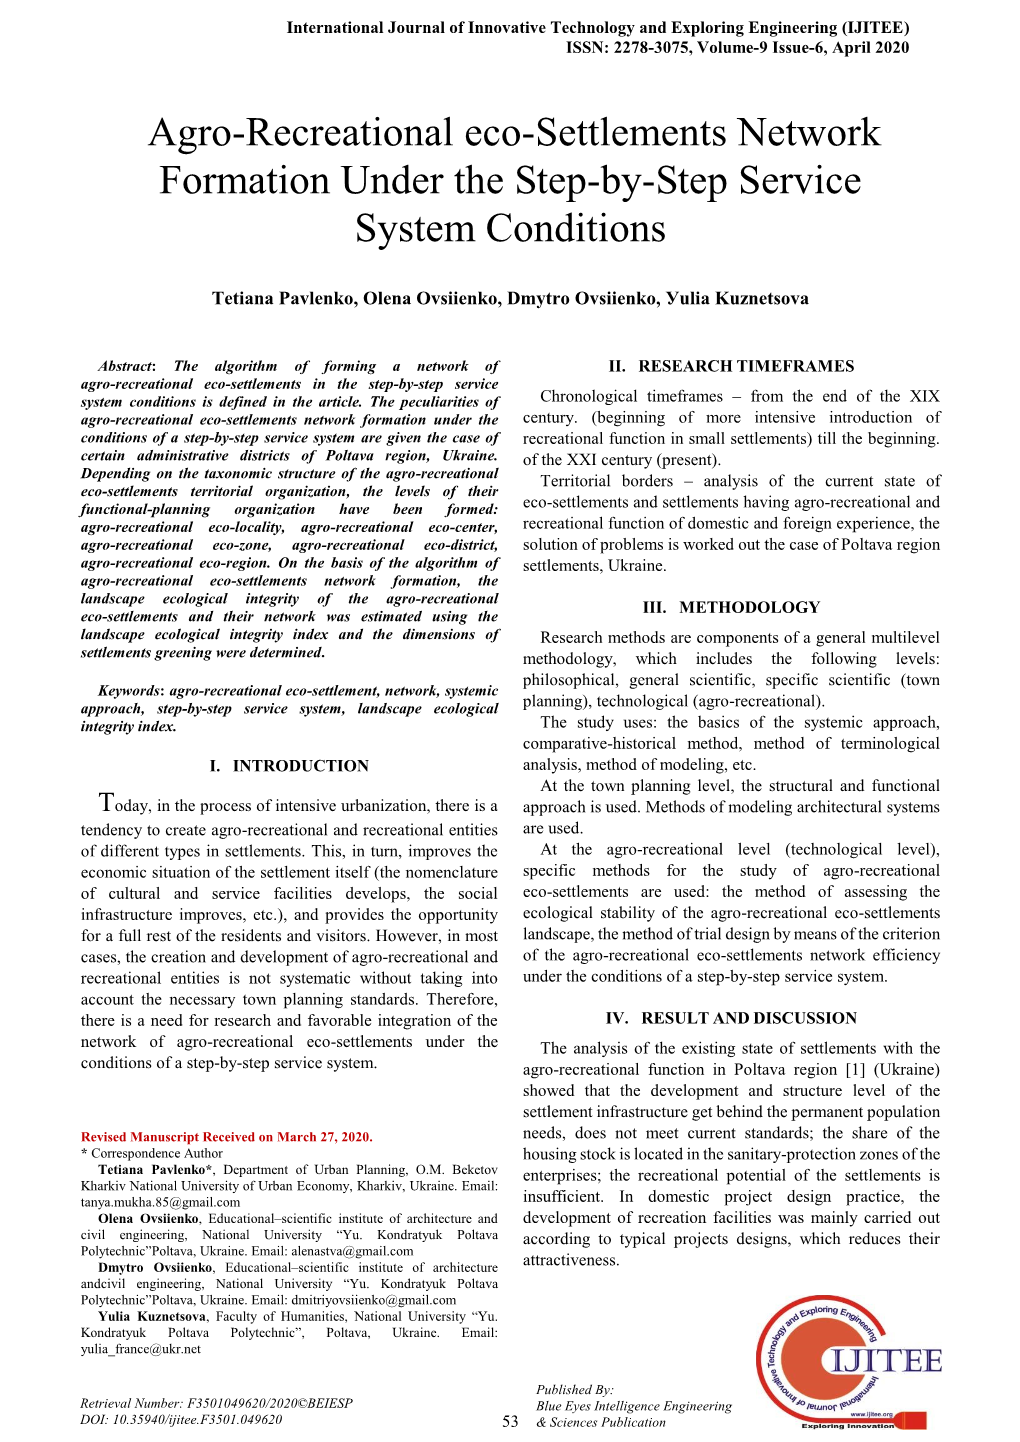 Agro-Recreational Eco-Settlements Network Formation Under the Step-By-Step Service System Conditions